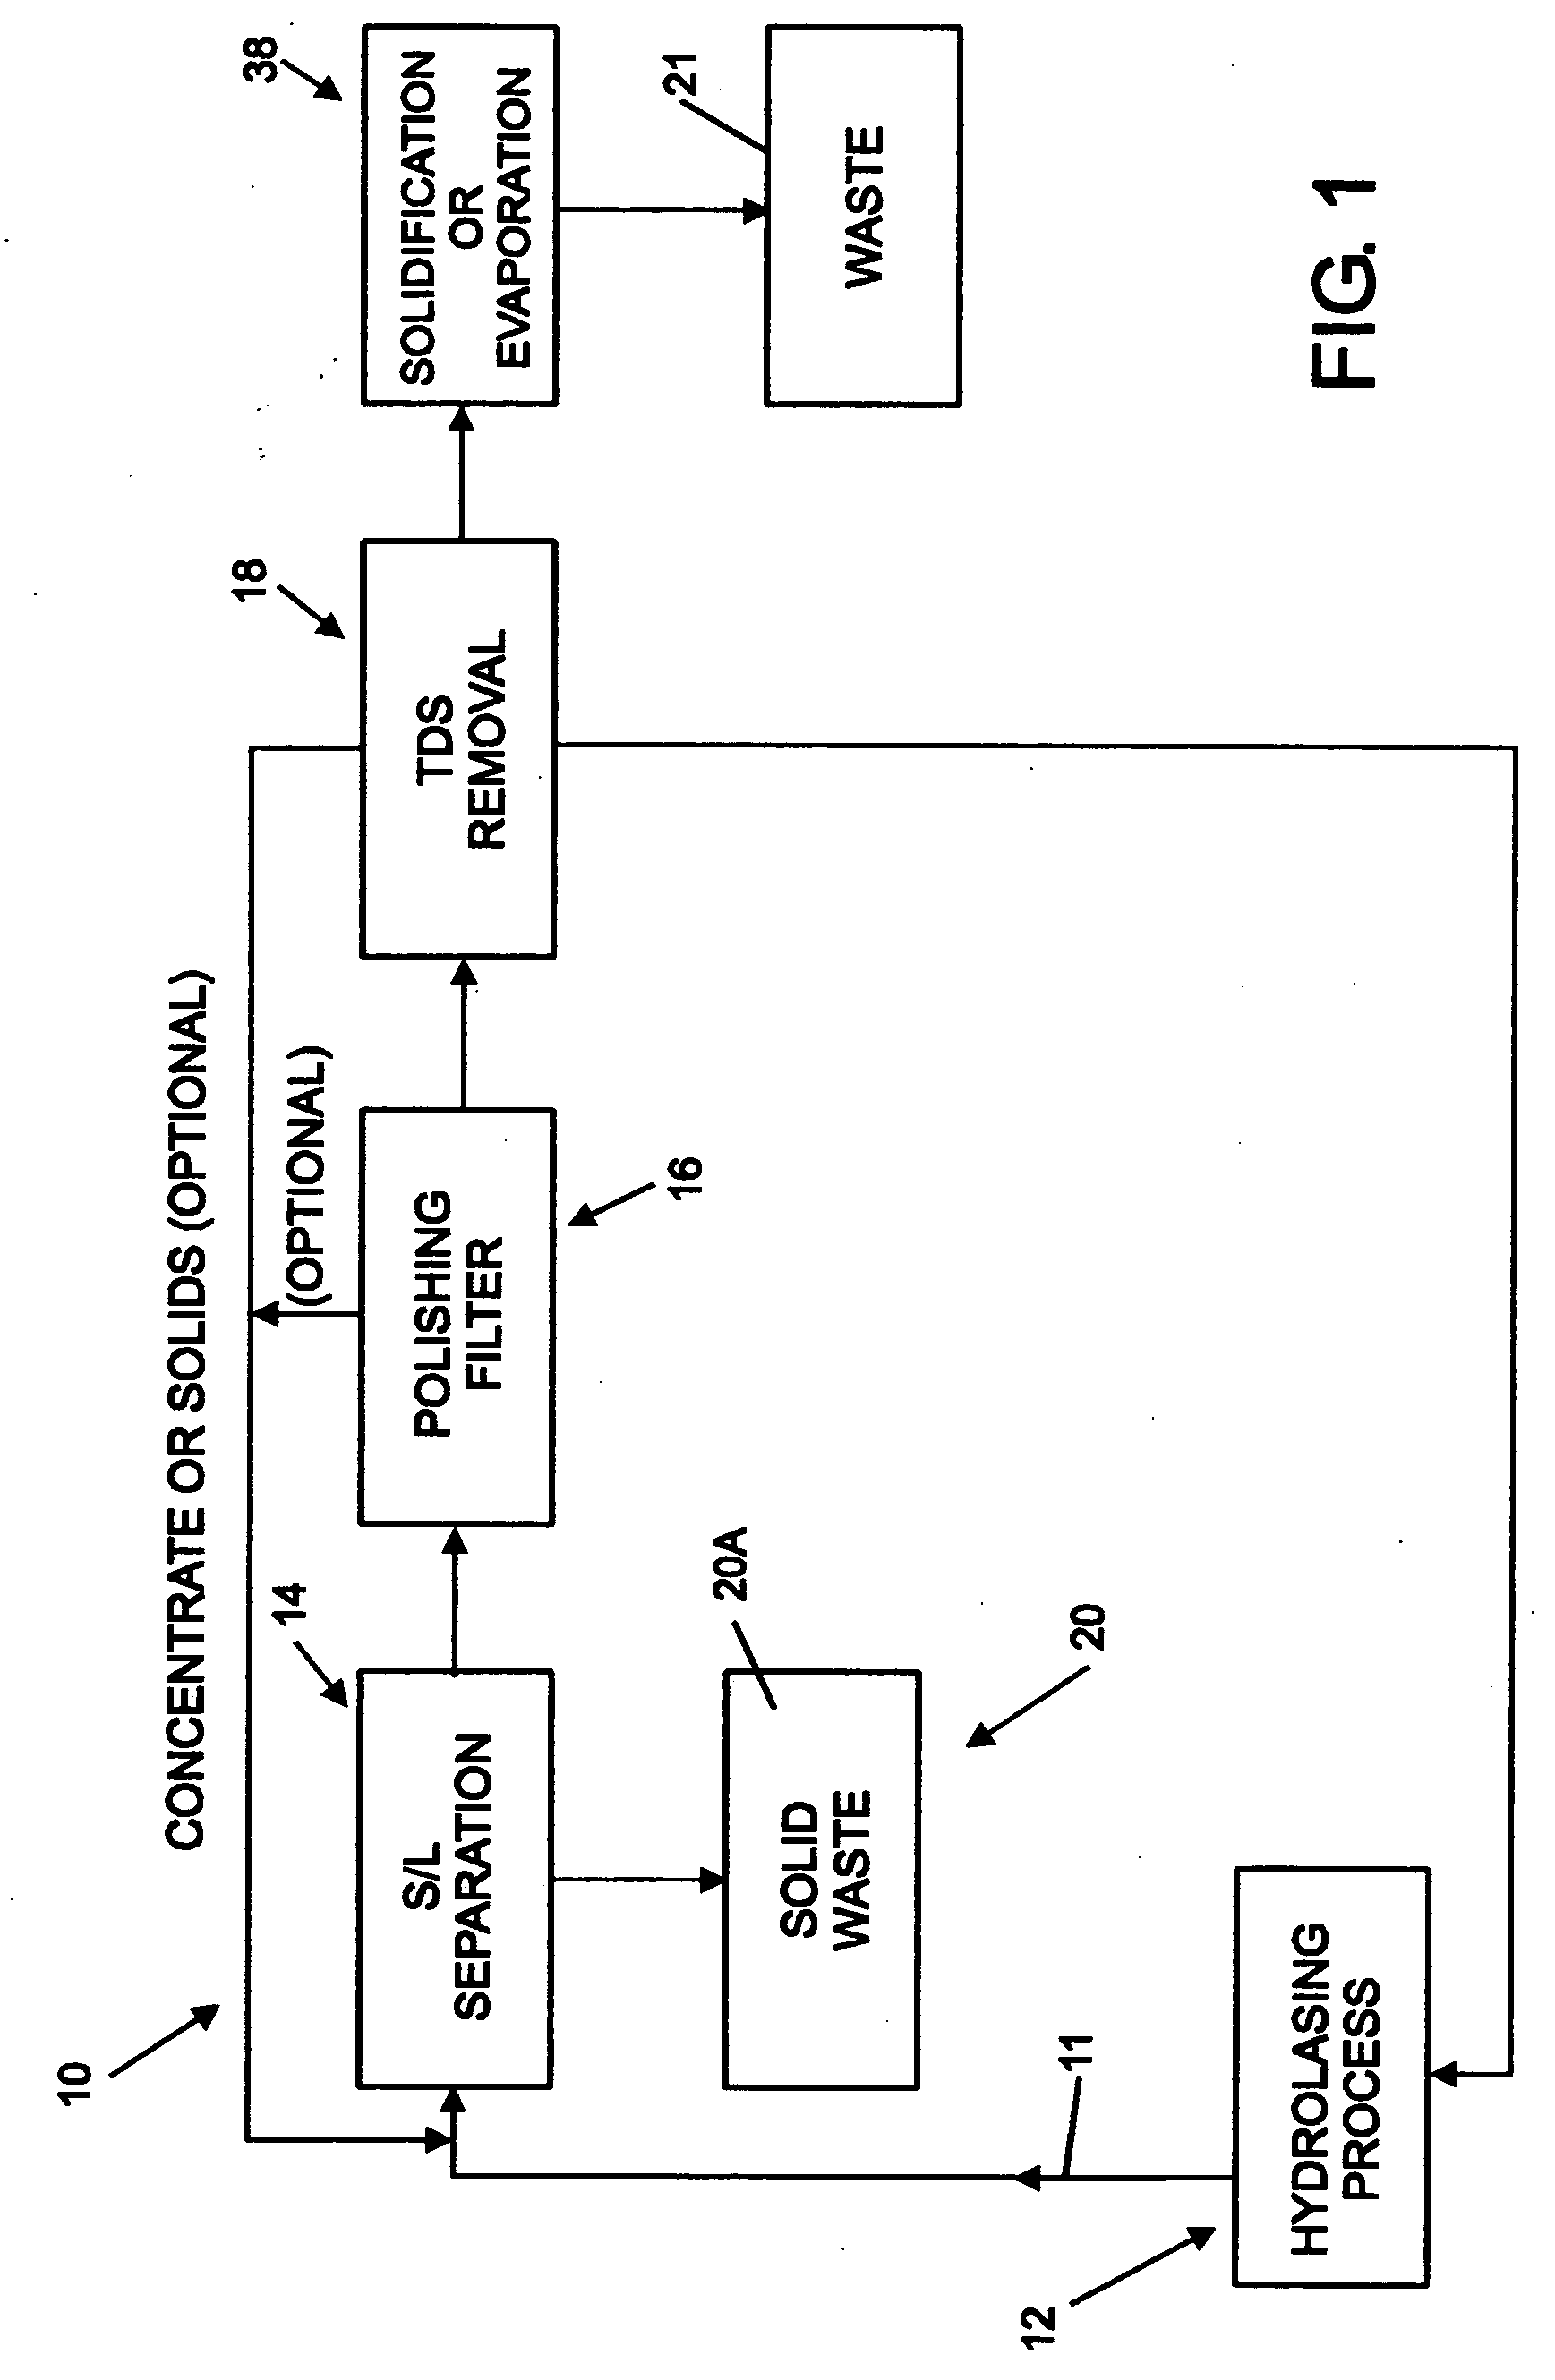 Method for processing hydrolasing wastewater and for recycling water